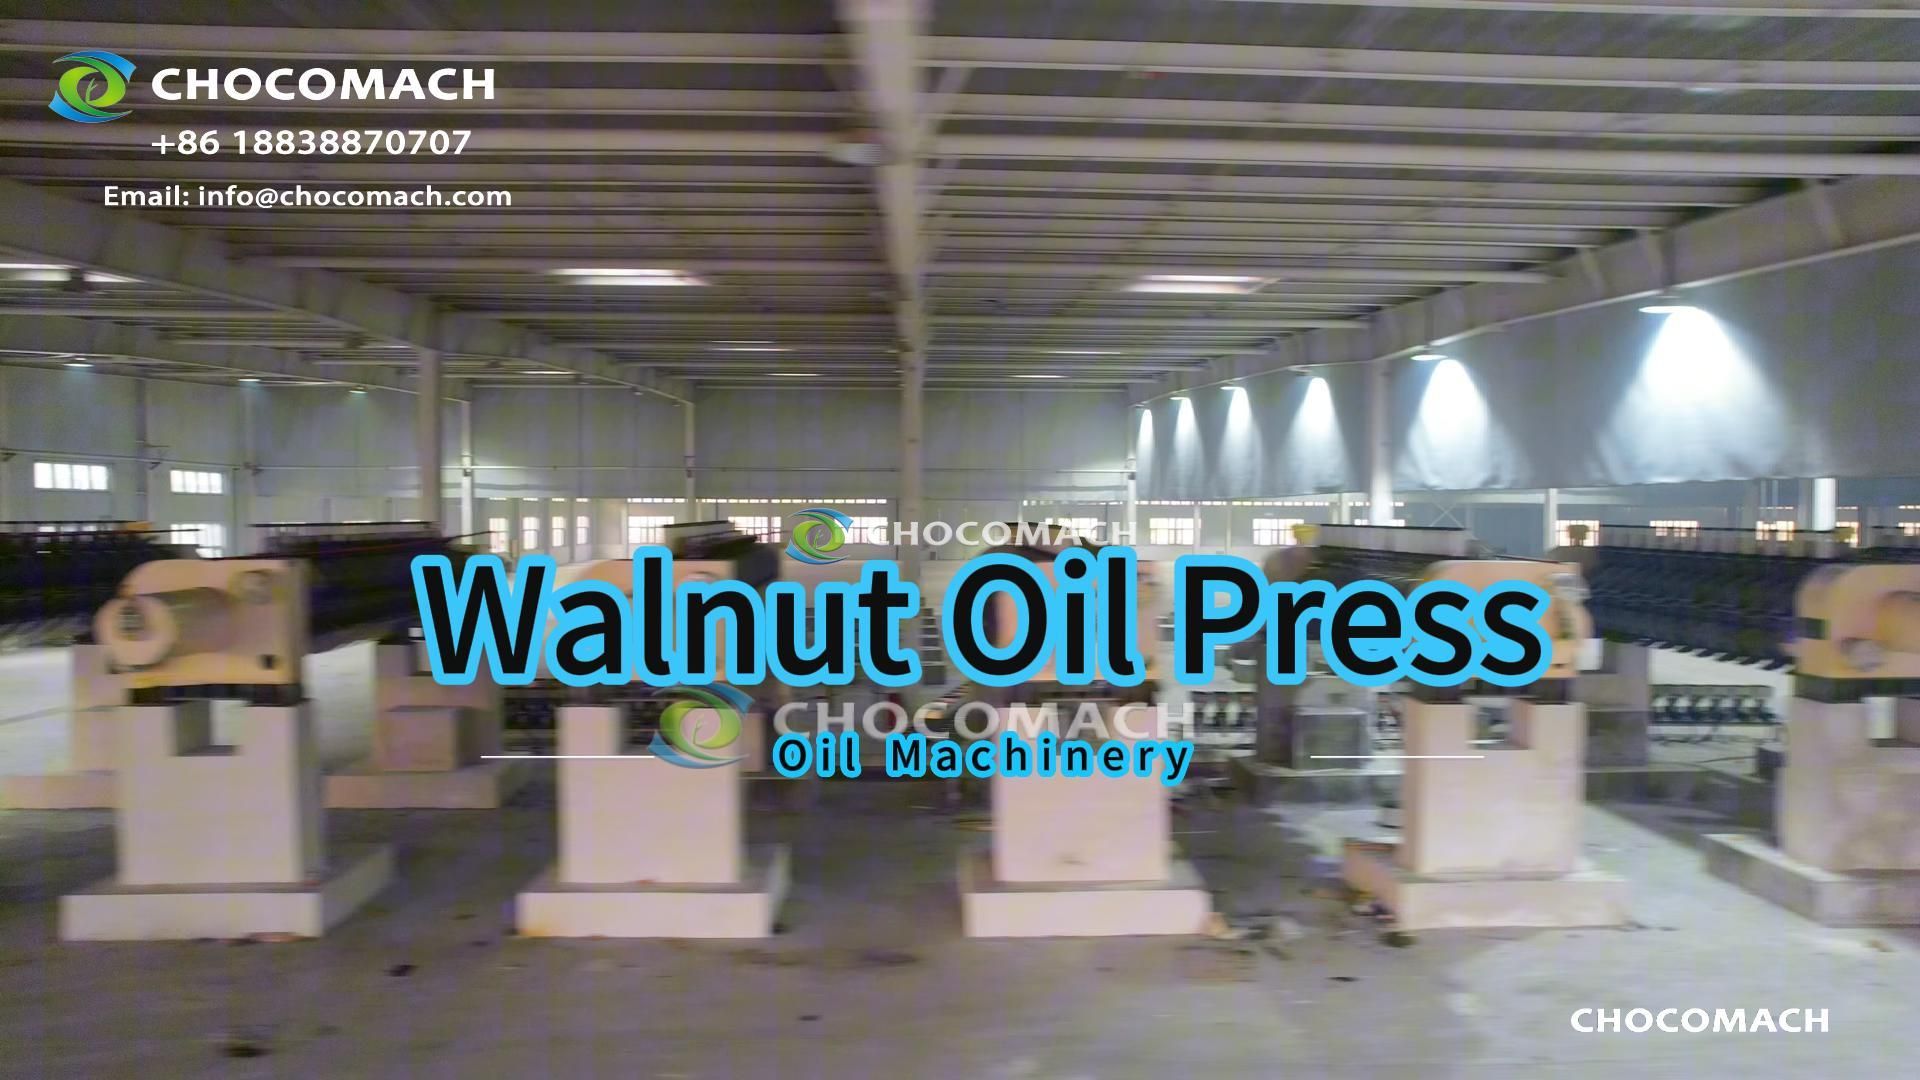 On the occasion of the New Year of 2024, 7 sets of CHOCOMACH friendly walnut oil presses are sent to Xinjiang Province